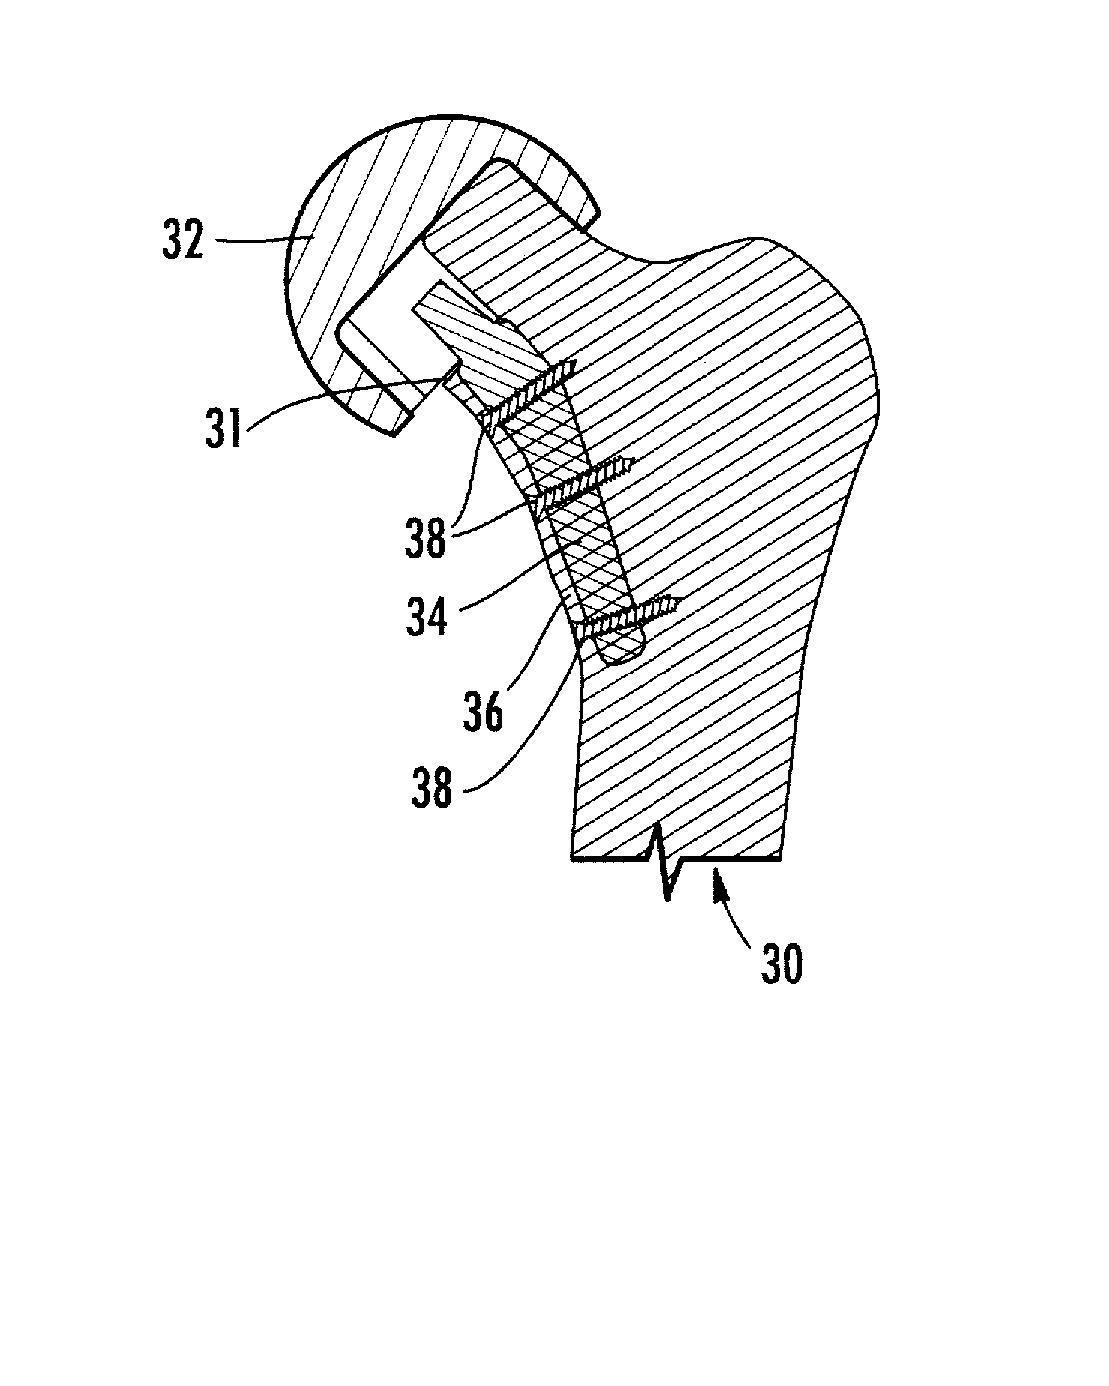 Femoral head resurfacing implant with internal plate fixation and instrumentation